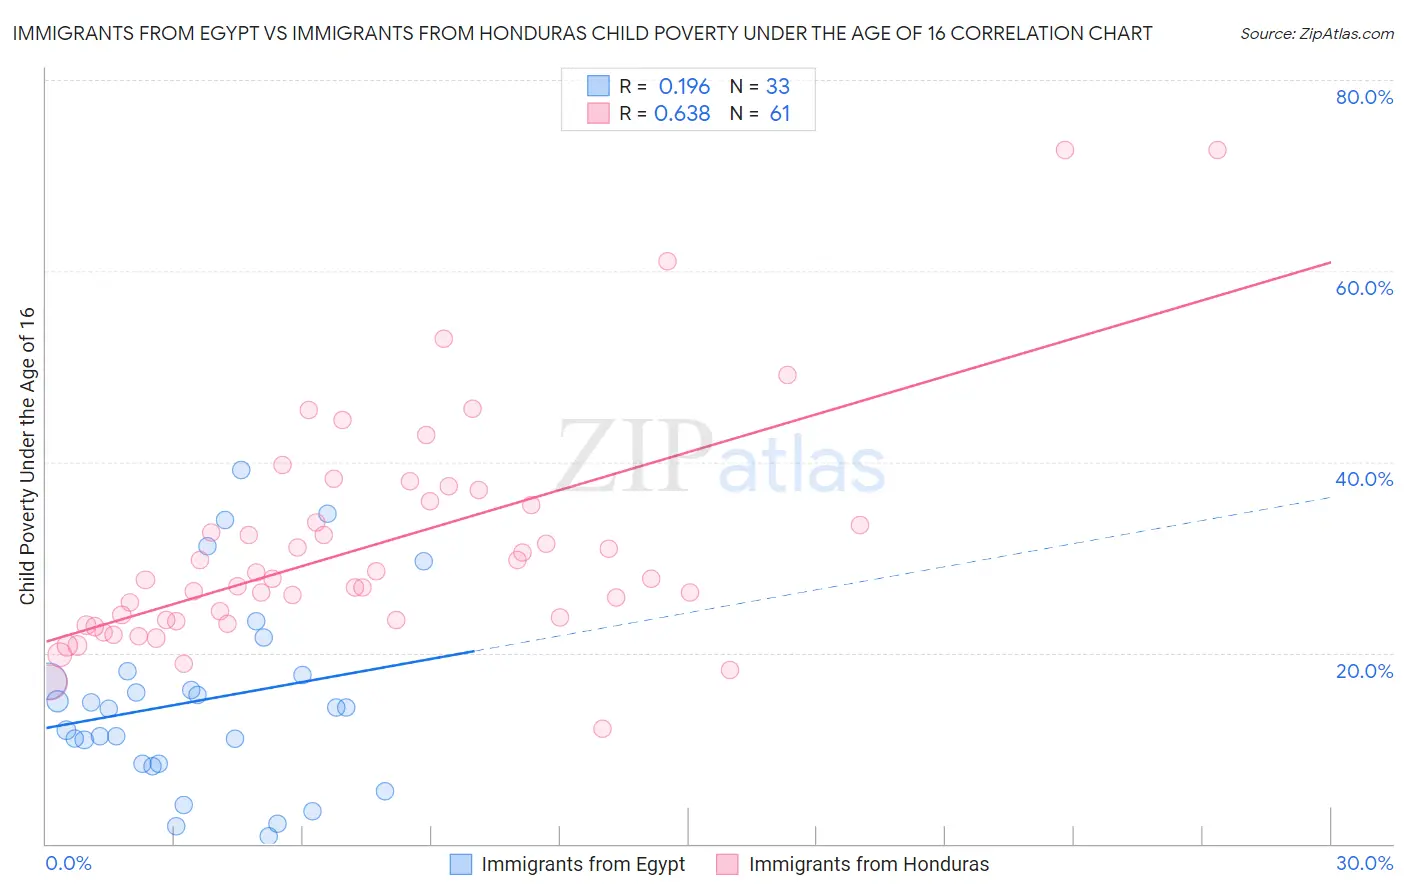 Immigrants from Egypt vs Immigrants from Honduras Child Poverty Under the Age of 16